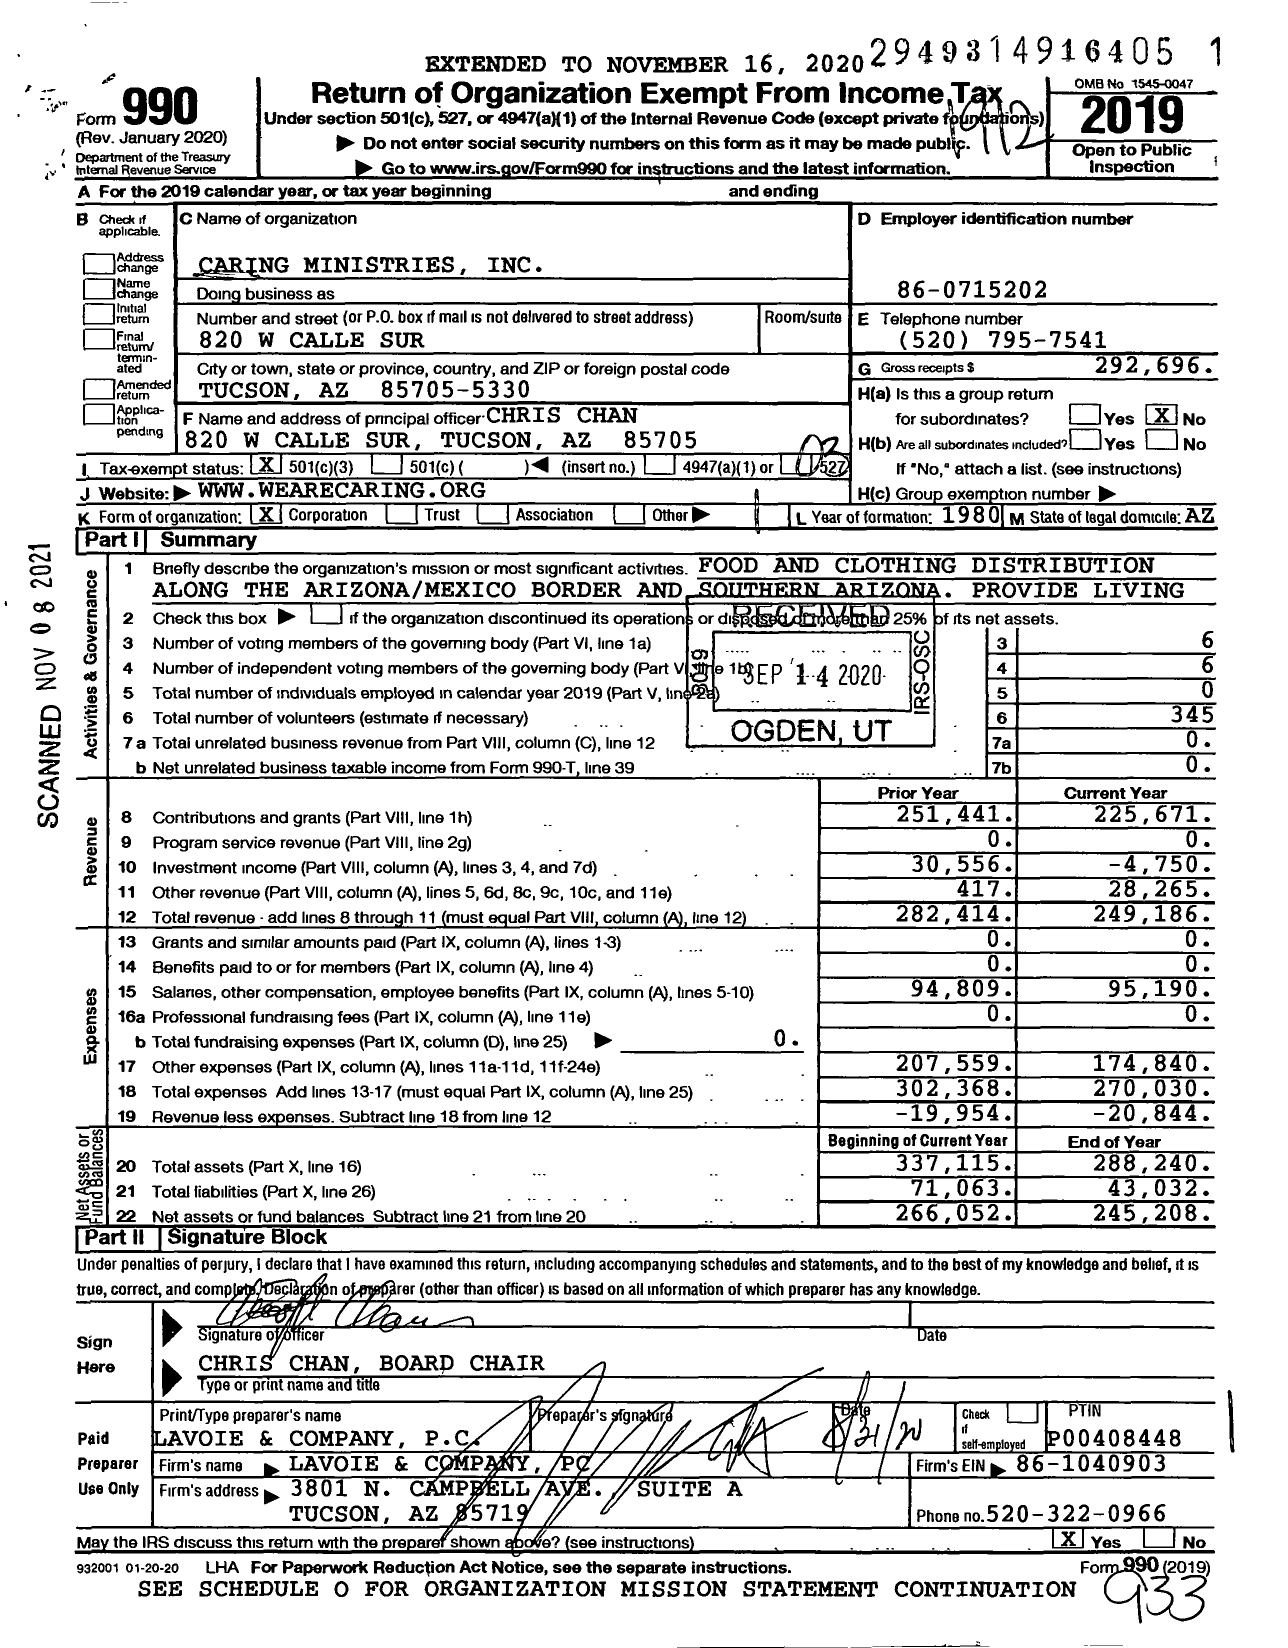 Image of first page of 2019 Form 990 for Caring Ministries